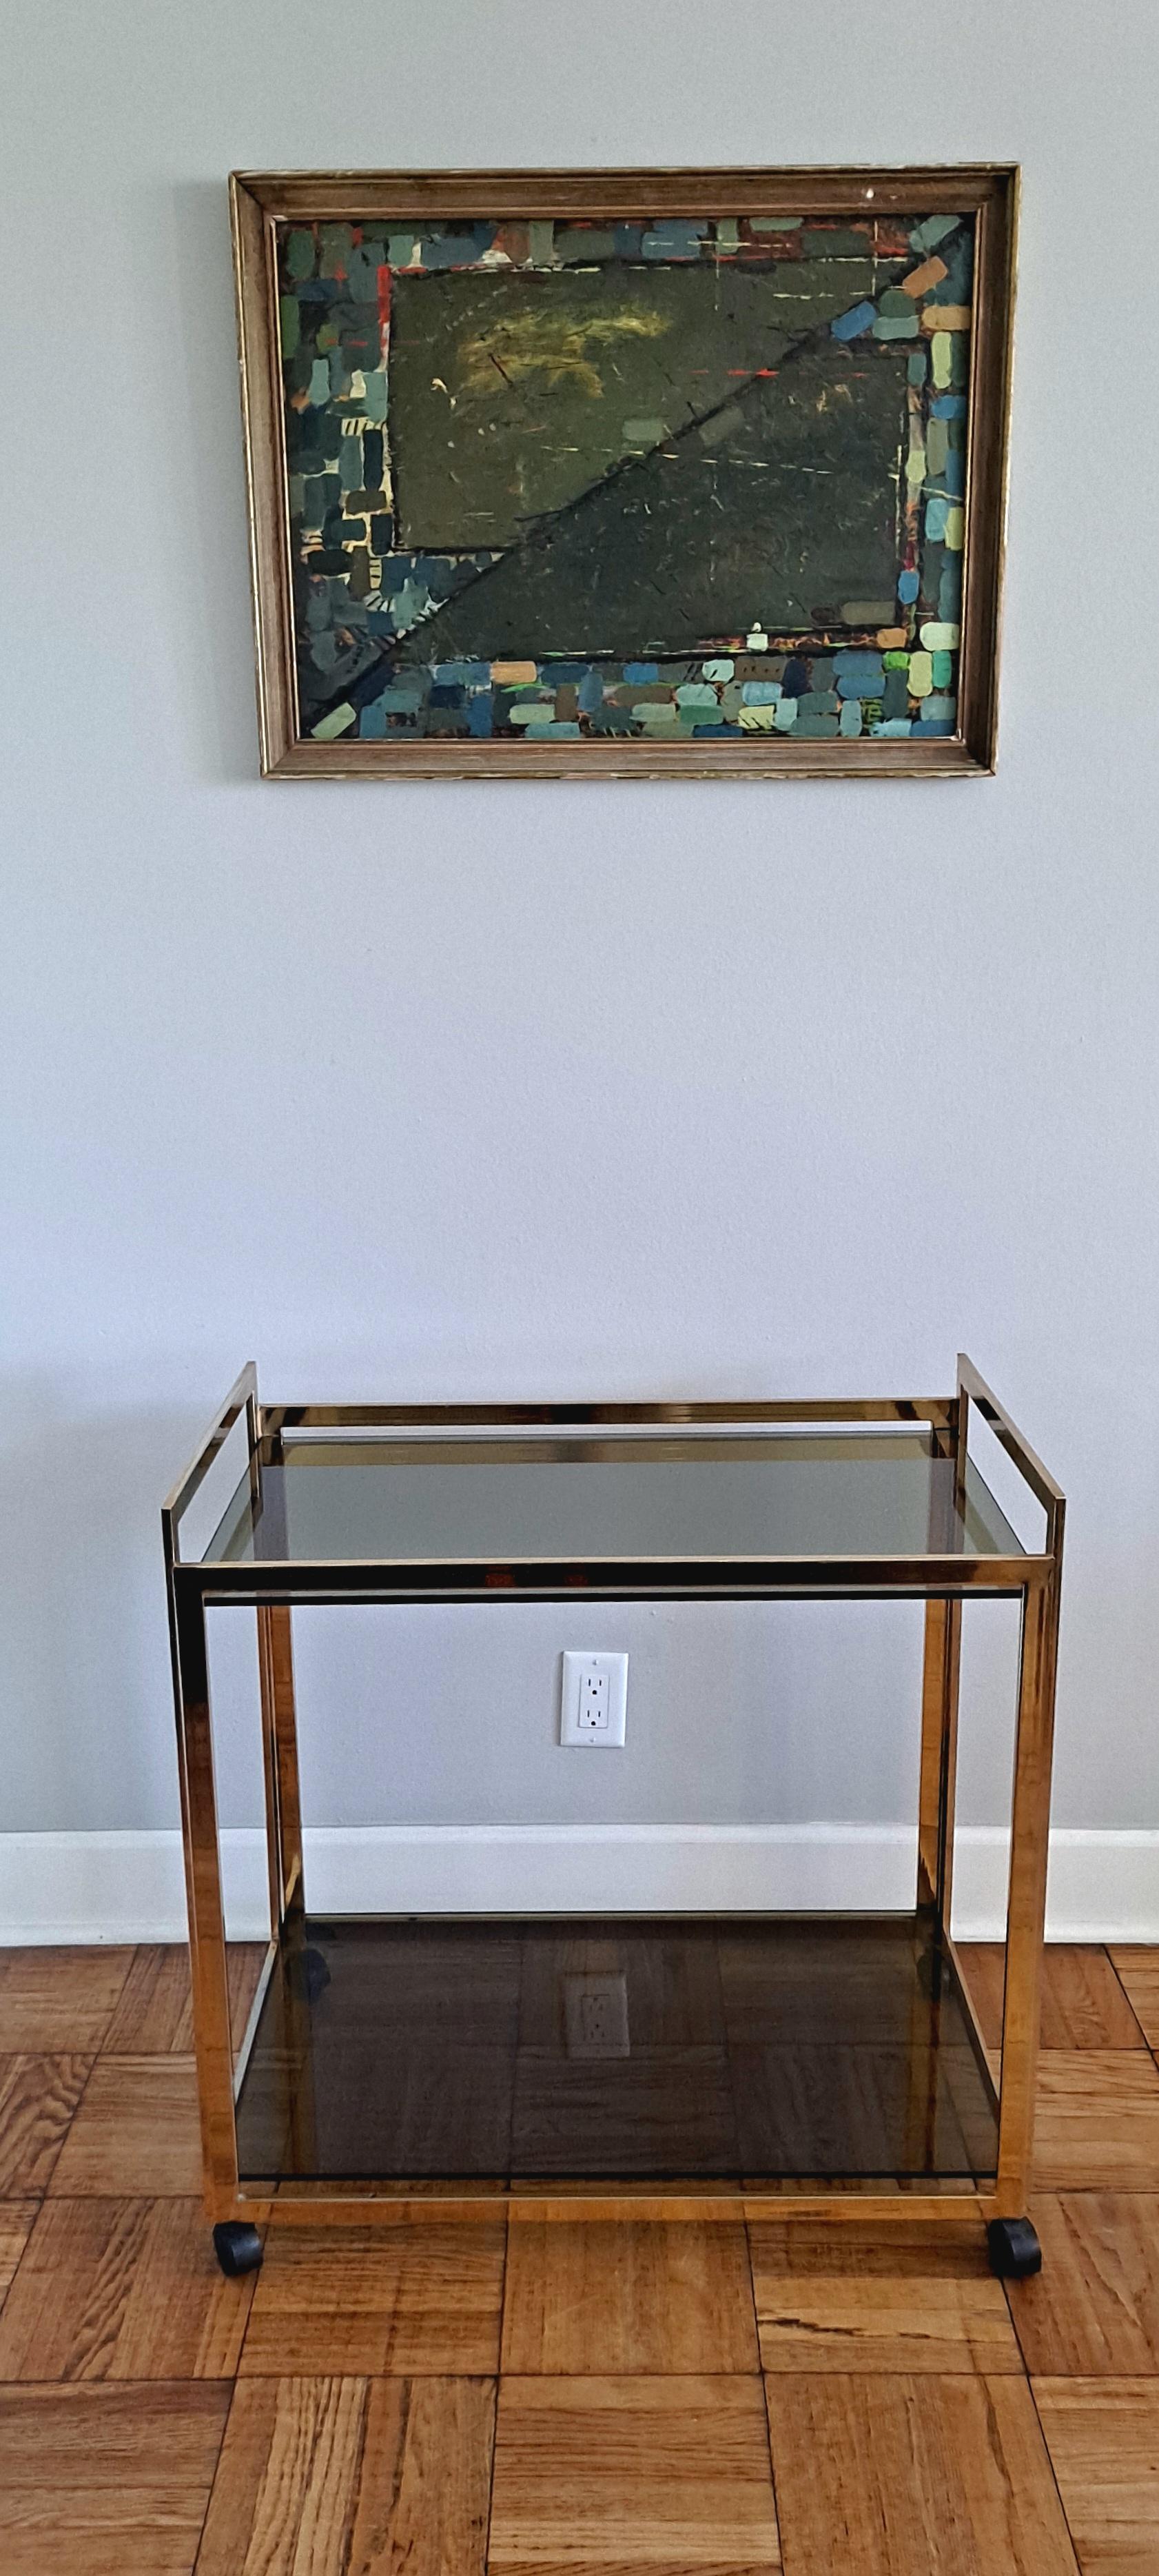  Italian Brass Dry Bar Cart - Serving Tray In Good Condition For Sale In Los Angeles, CA